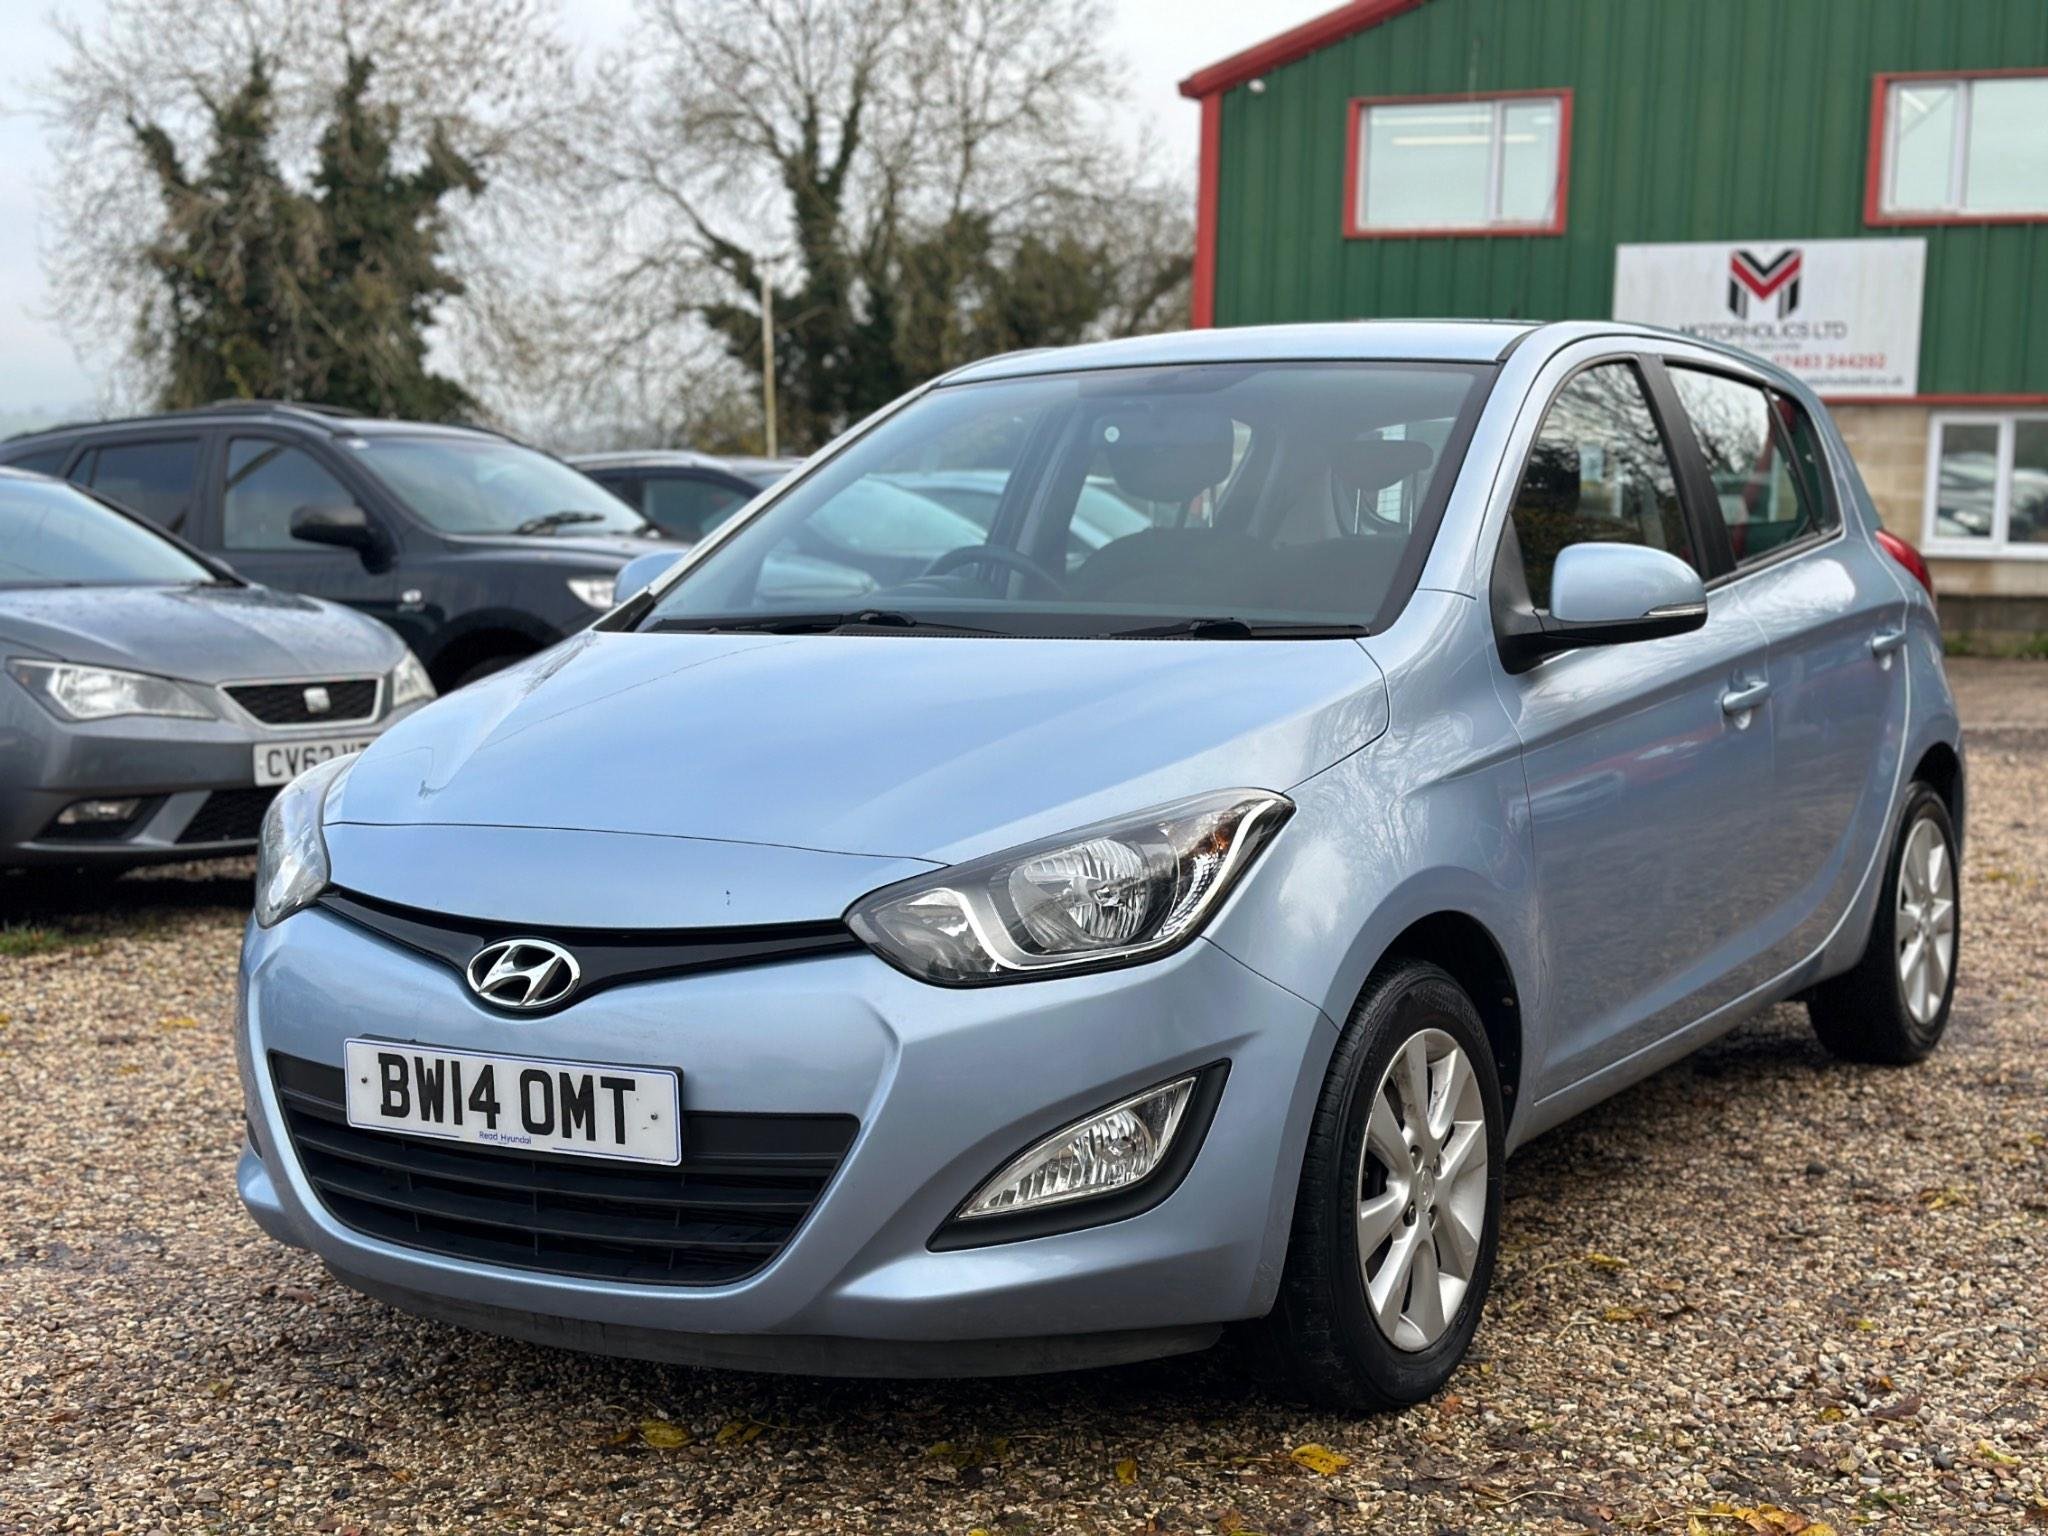 Used 2014 Hyundai i20 1.2 Active Euro 5 5dr for sale in Chippenham ...